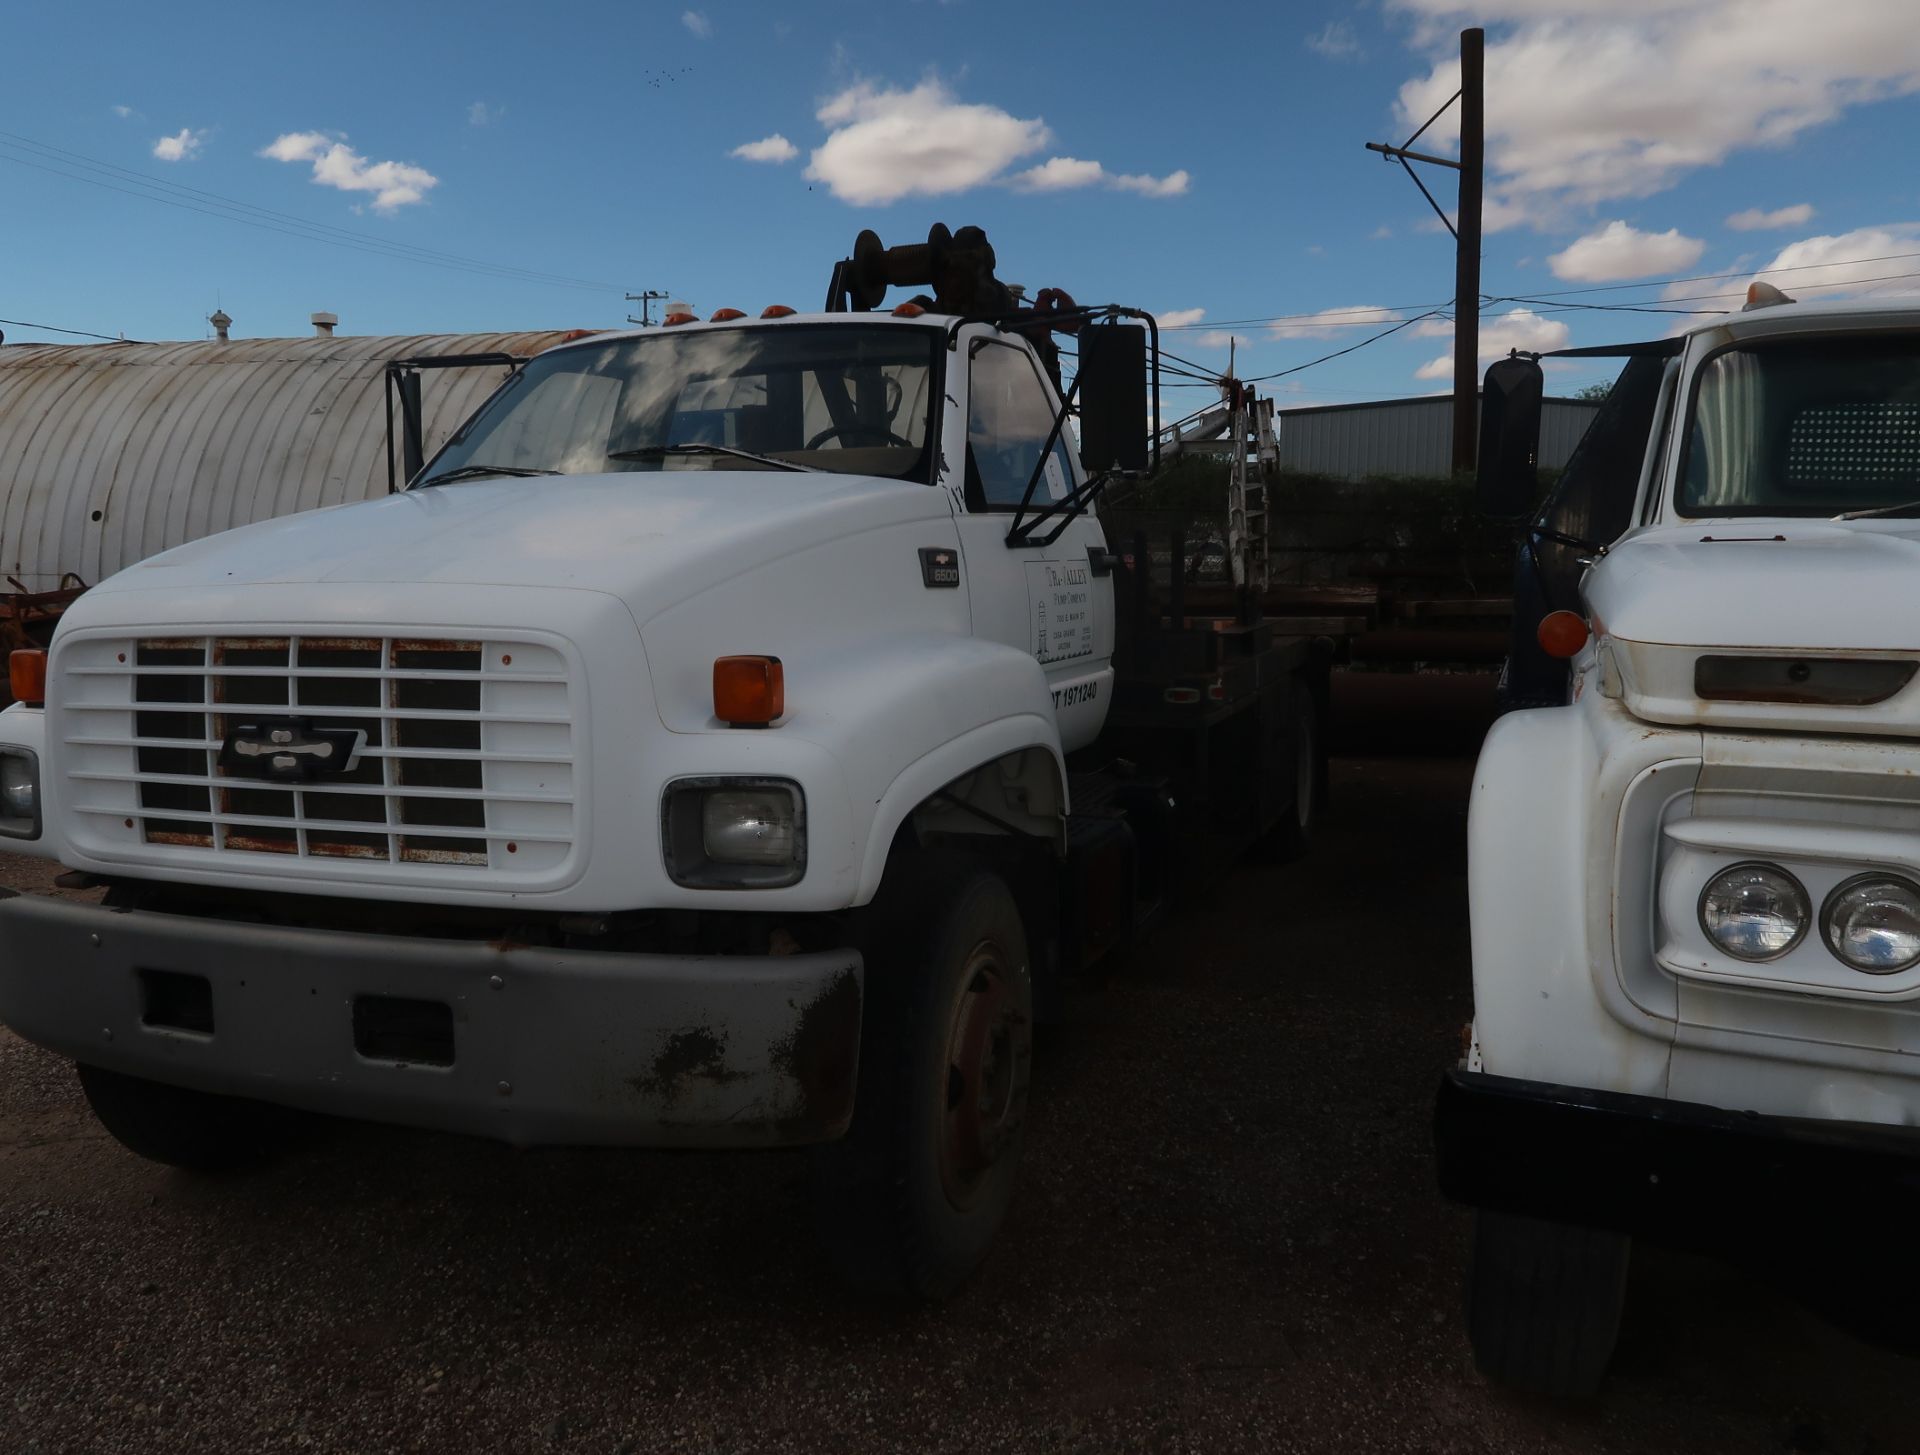 1997 CHEVY C-6500 A FRAME WINCH TRUCK (STANDARD) VIN. 1GBJ7H1P3VJ100920 - Image 2 of 9